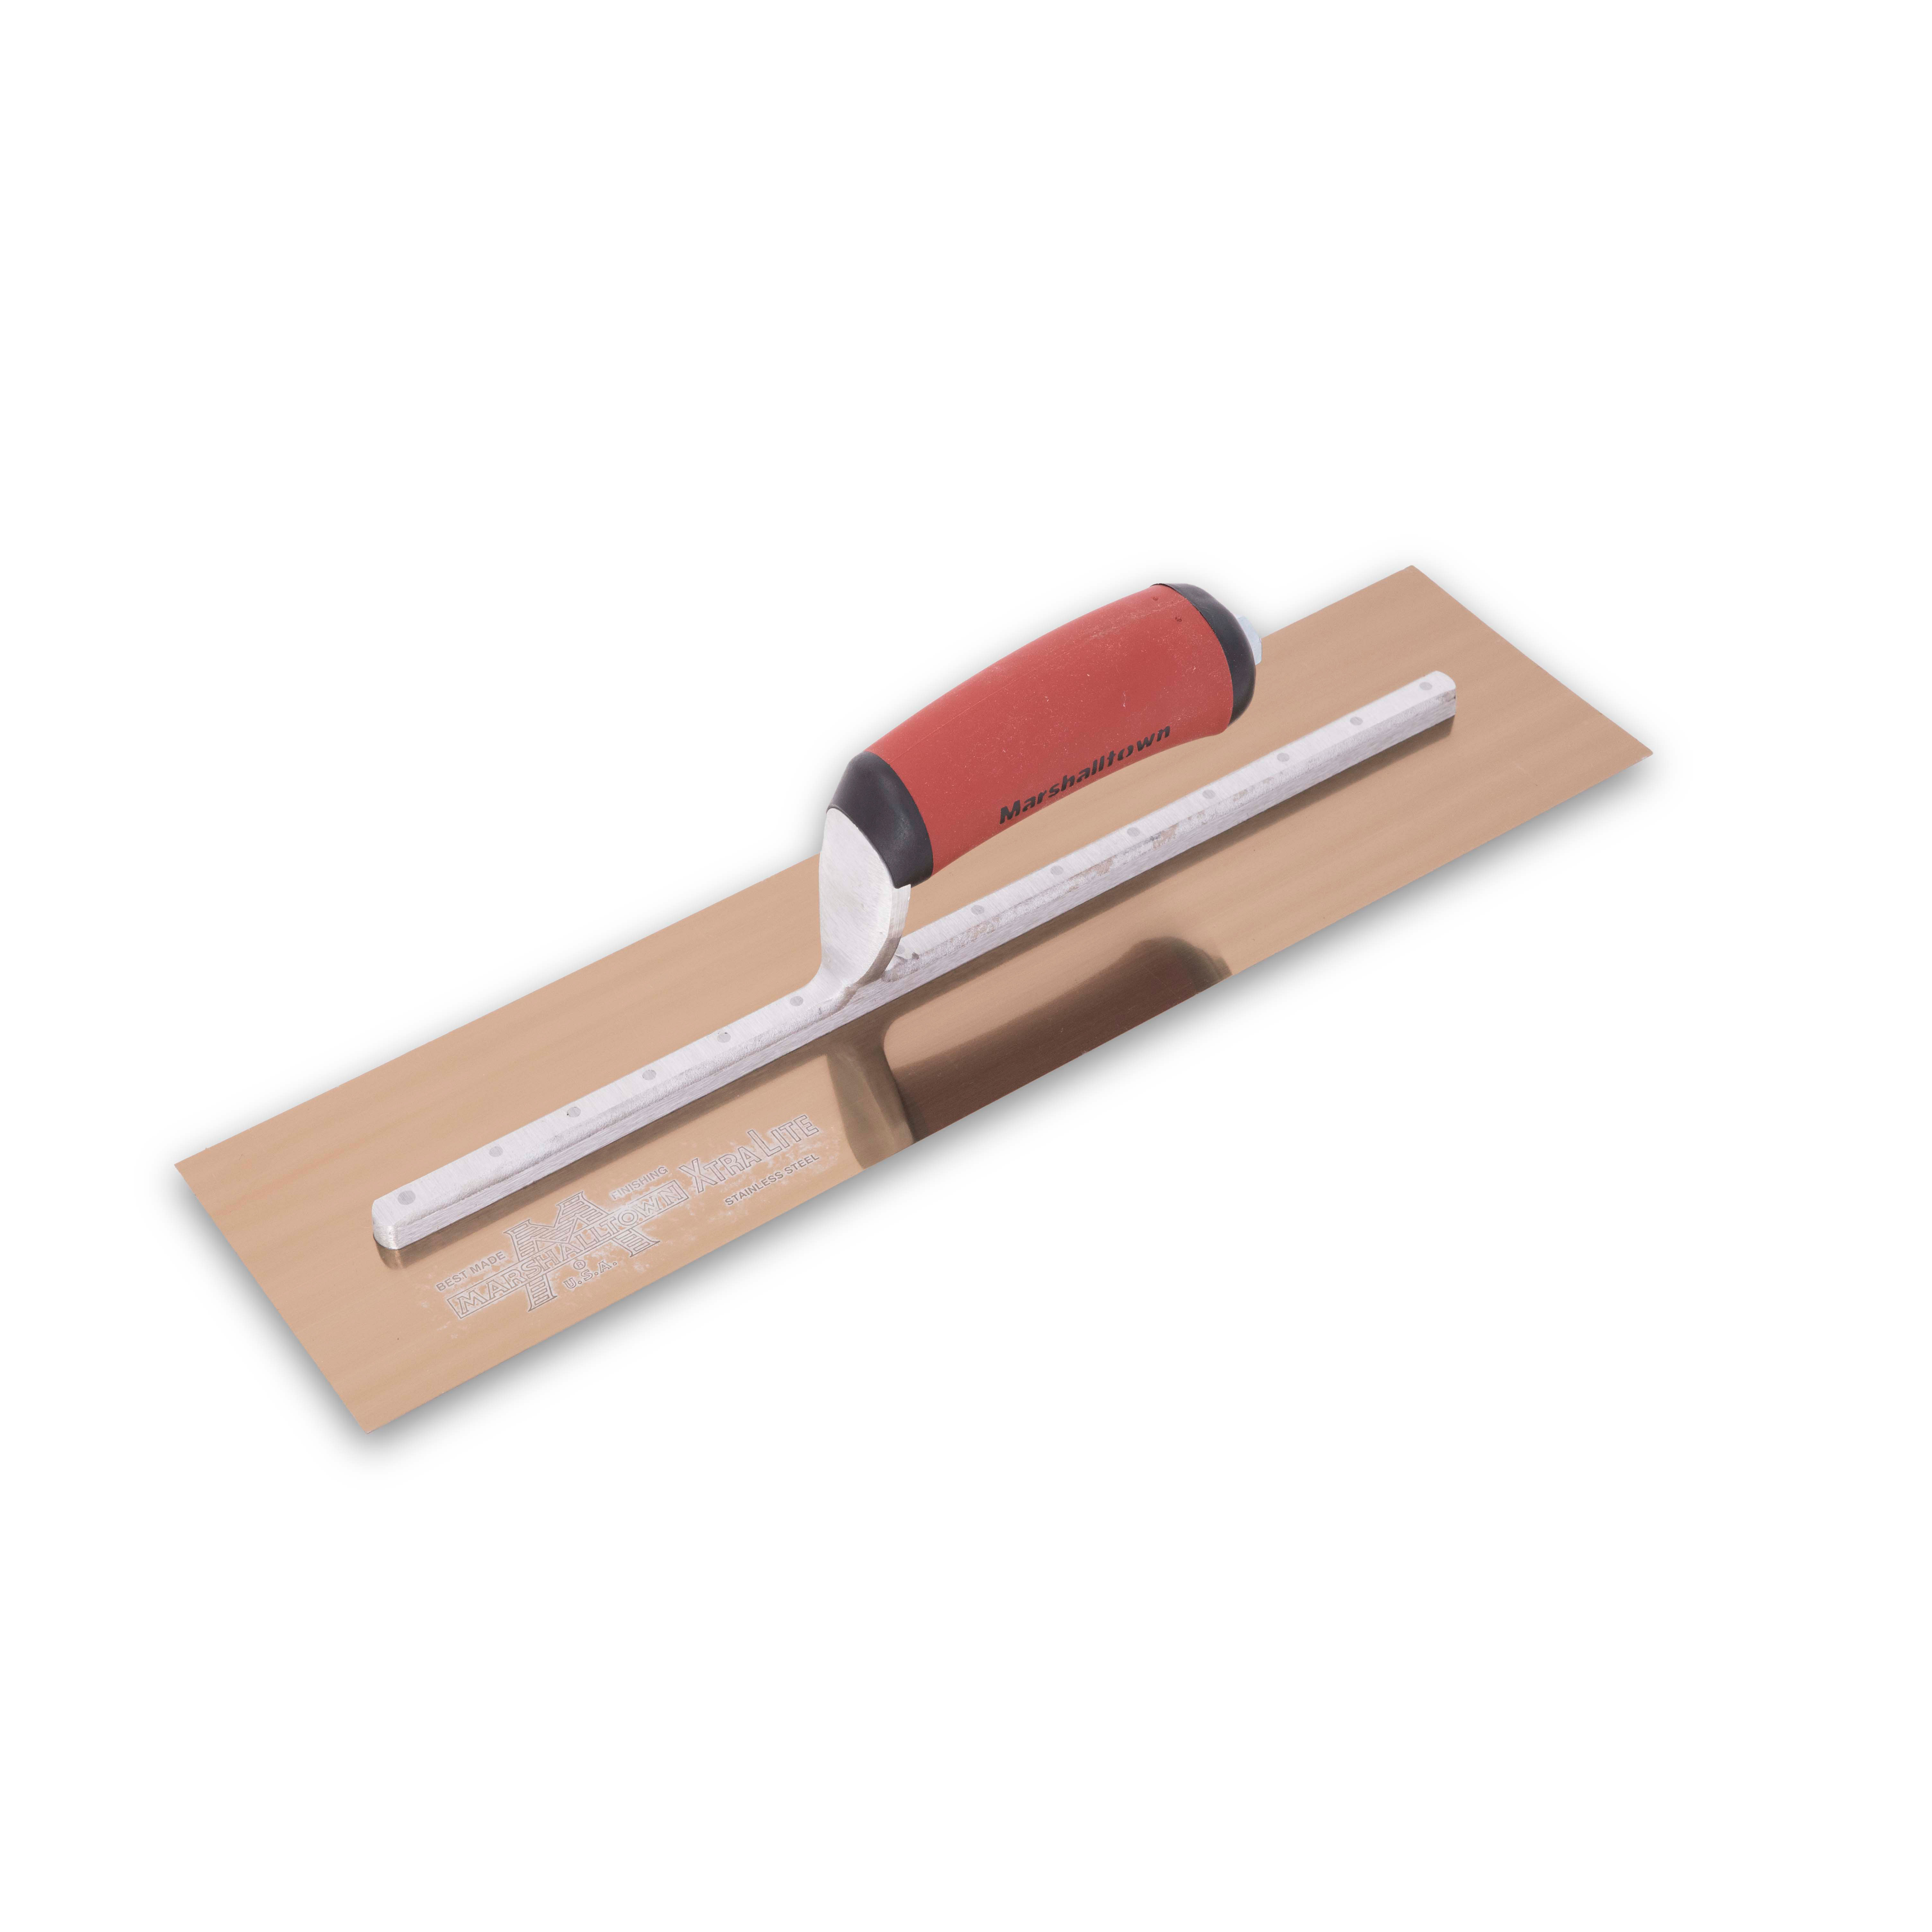 Marshalltown MXS66GSD 16in. x 4in. Golden Stainless Steel Finishing Trowel with DuraSoft MXS66GSD